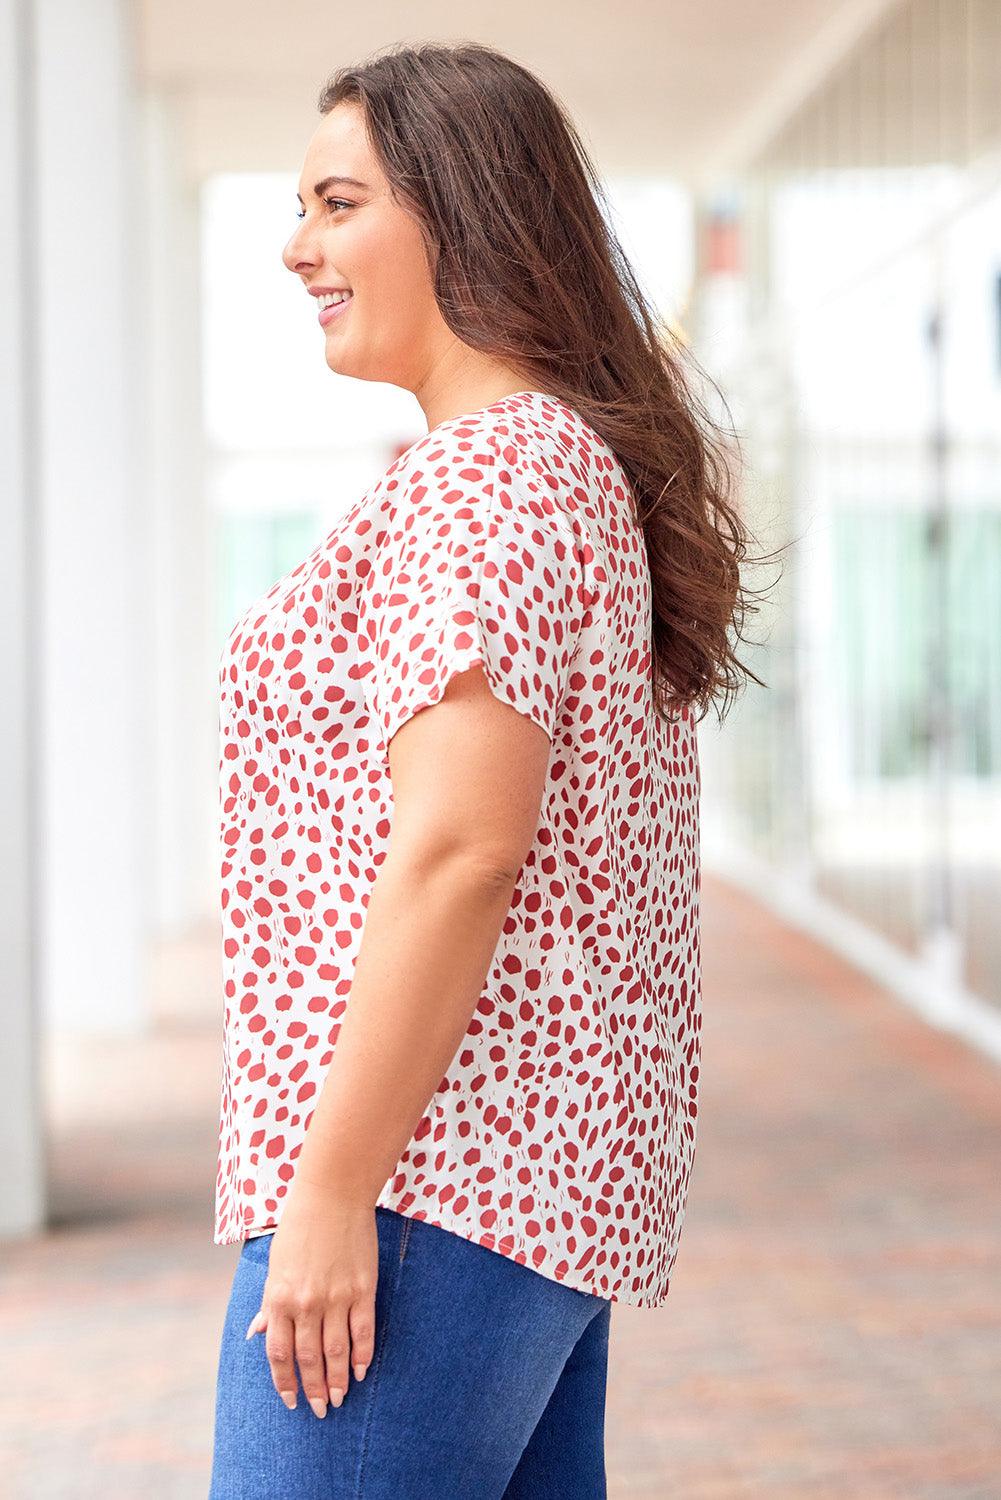 Upgrade your wardrobe with our Plus Size Printed V-Neck Blouses! Flaunt your style and feel confident. Shop now!